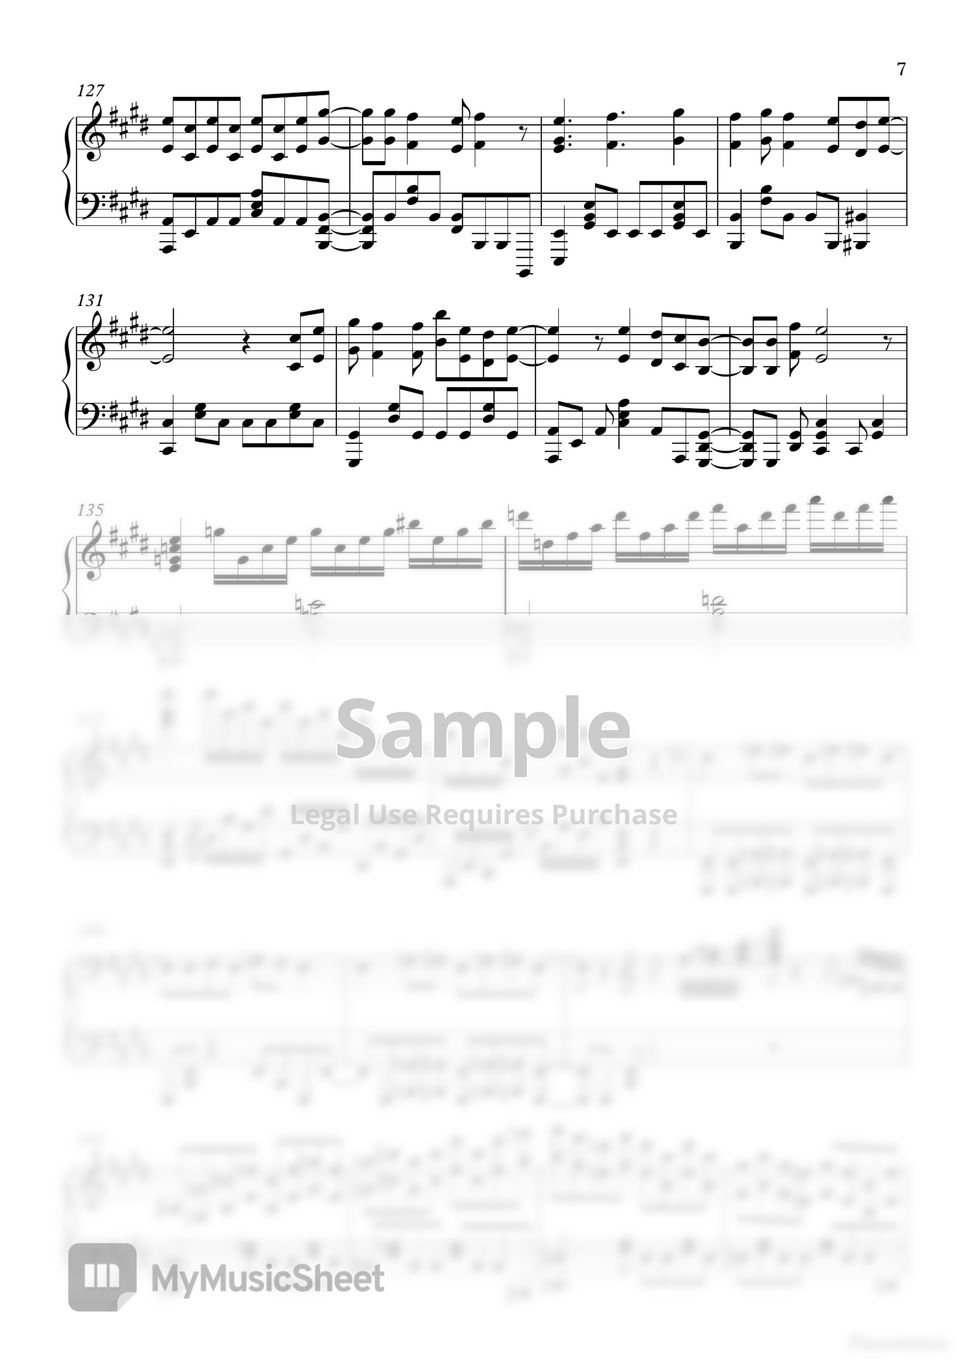 Digimon Opening Butter-Fly - Koji Wada Sheet music for Bass voice, Vocals,  Guitar, Drum group & more instruments (Mixed Ensemble)